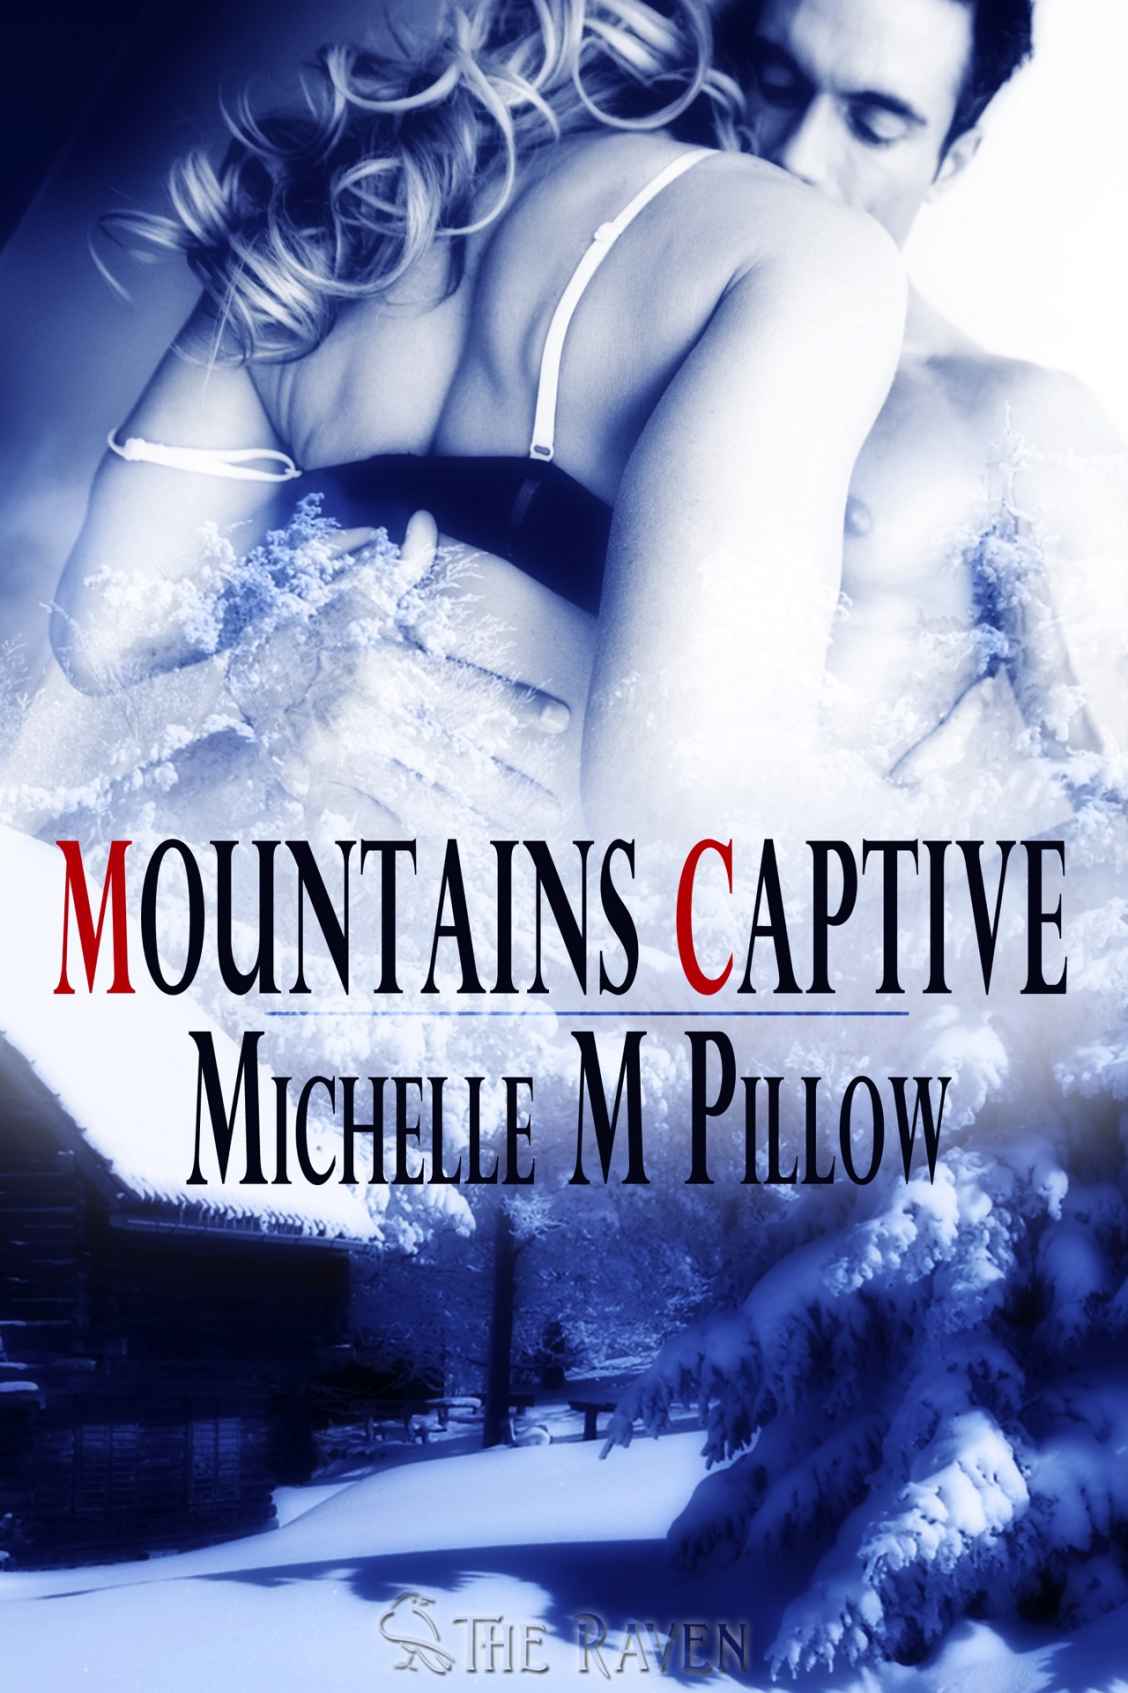 Mountain's Captive by Michelle M. Pillow